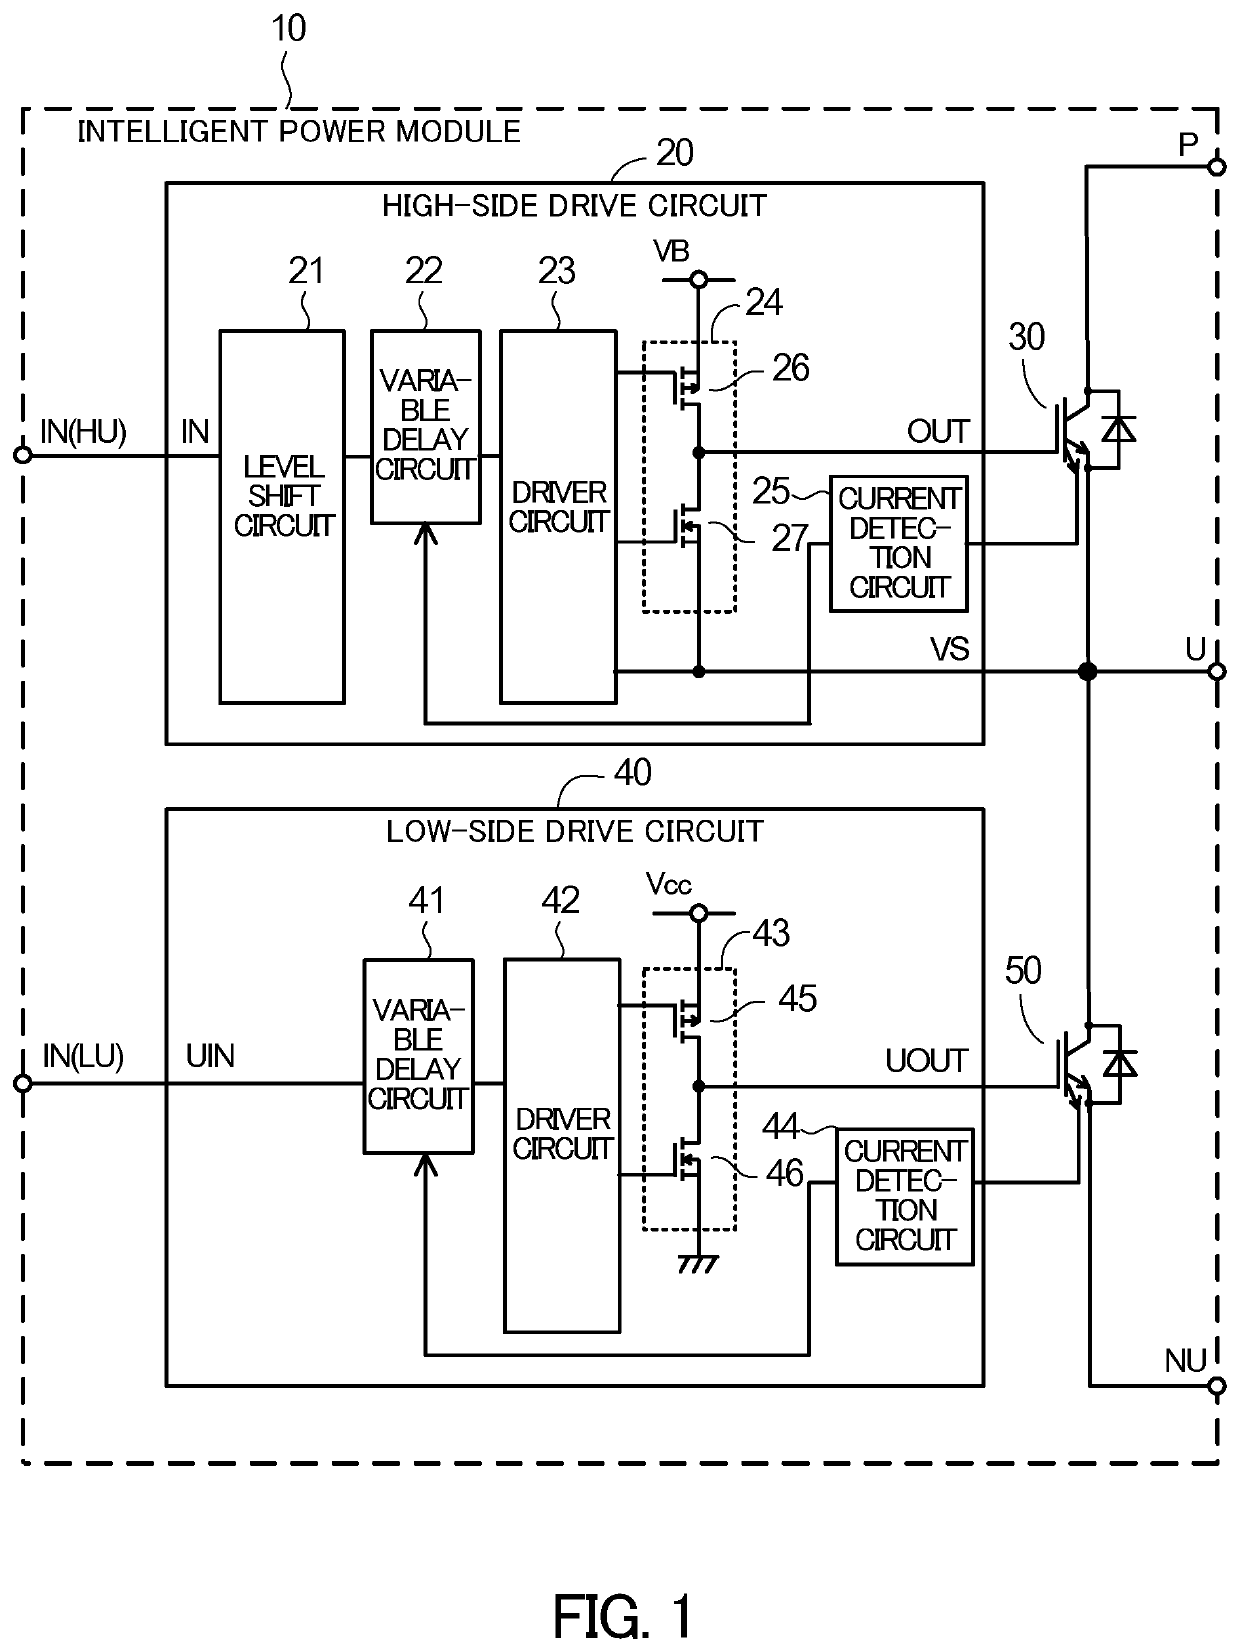 Power module with built-in drive circuits